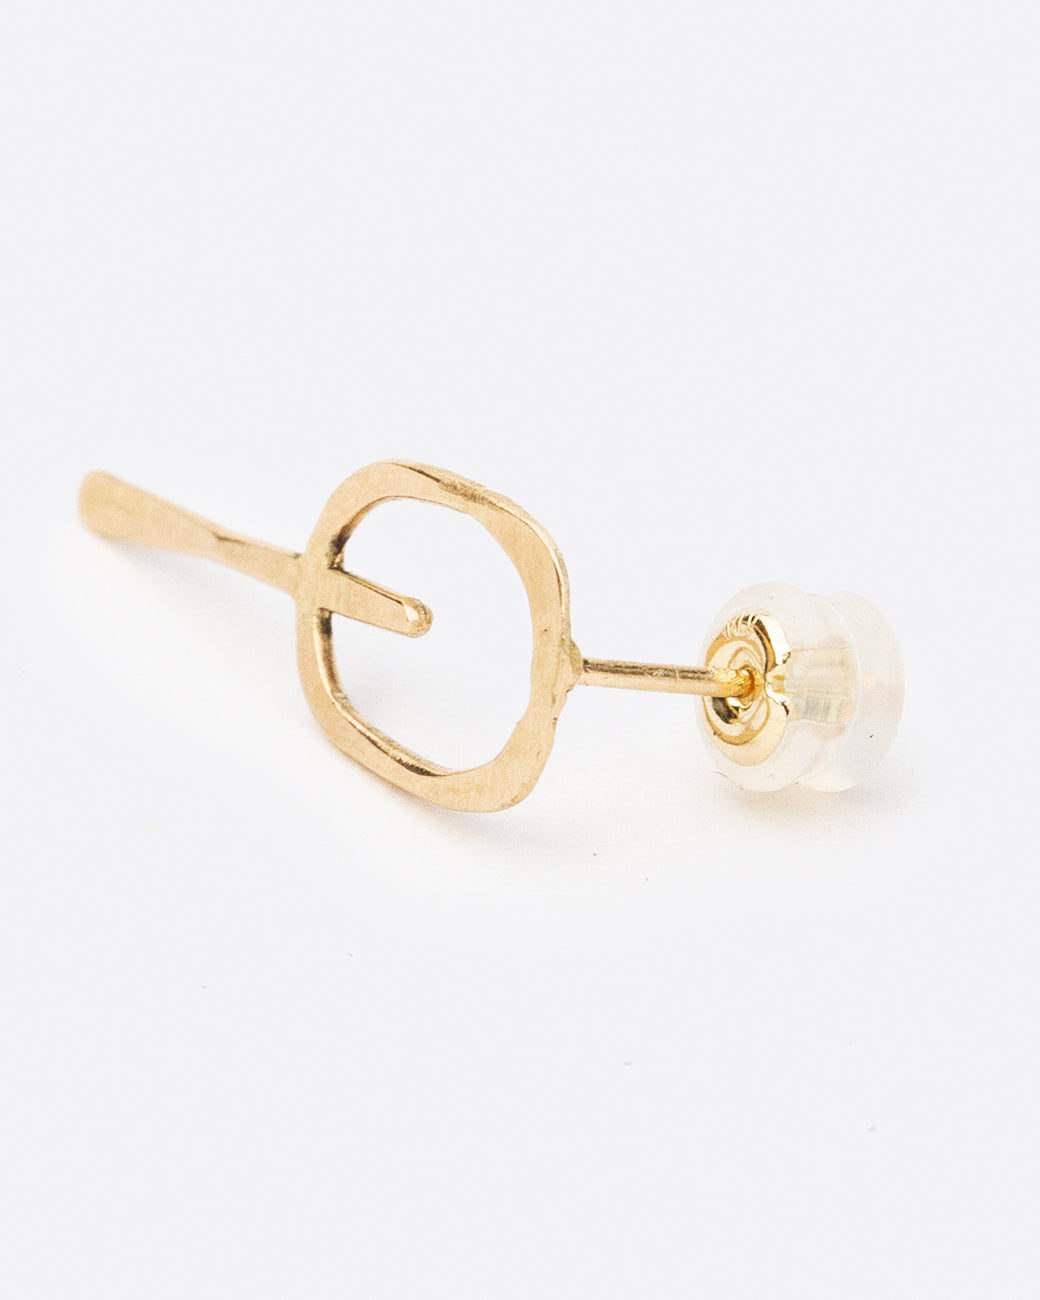 An easy-to-wear stud that sits flush to the ear, whose hammered finish gives it some sparkle.